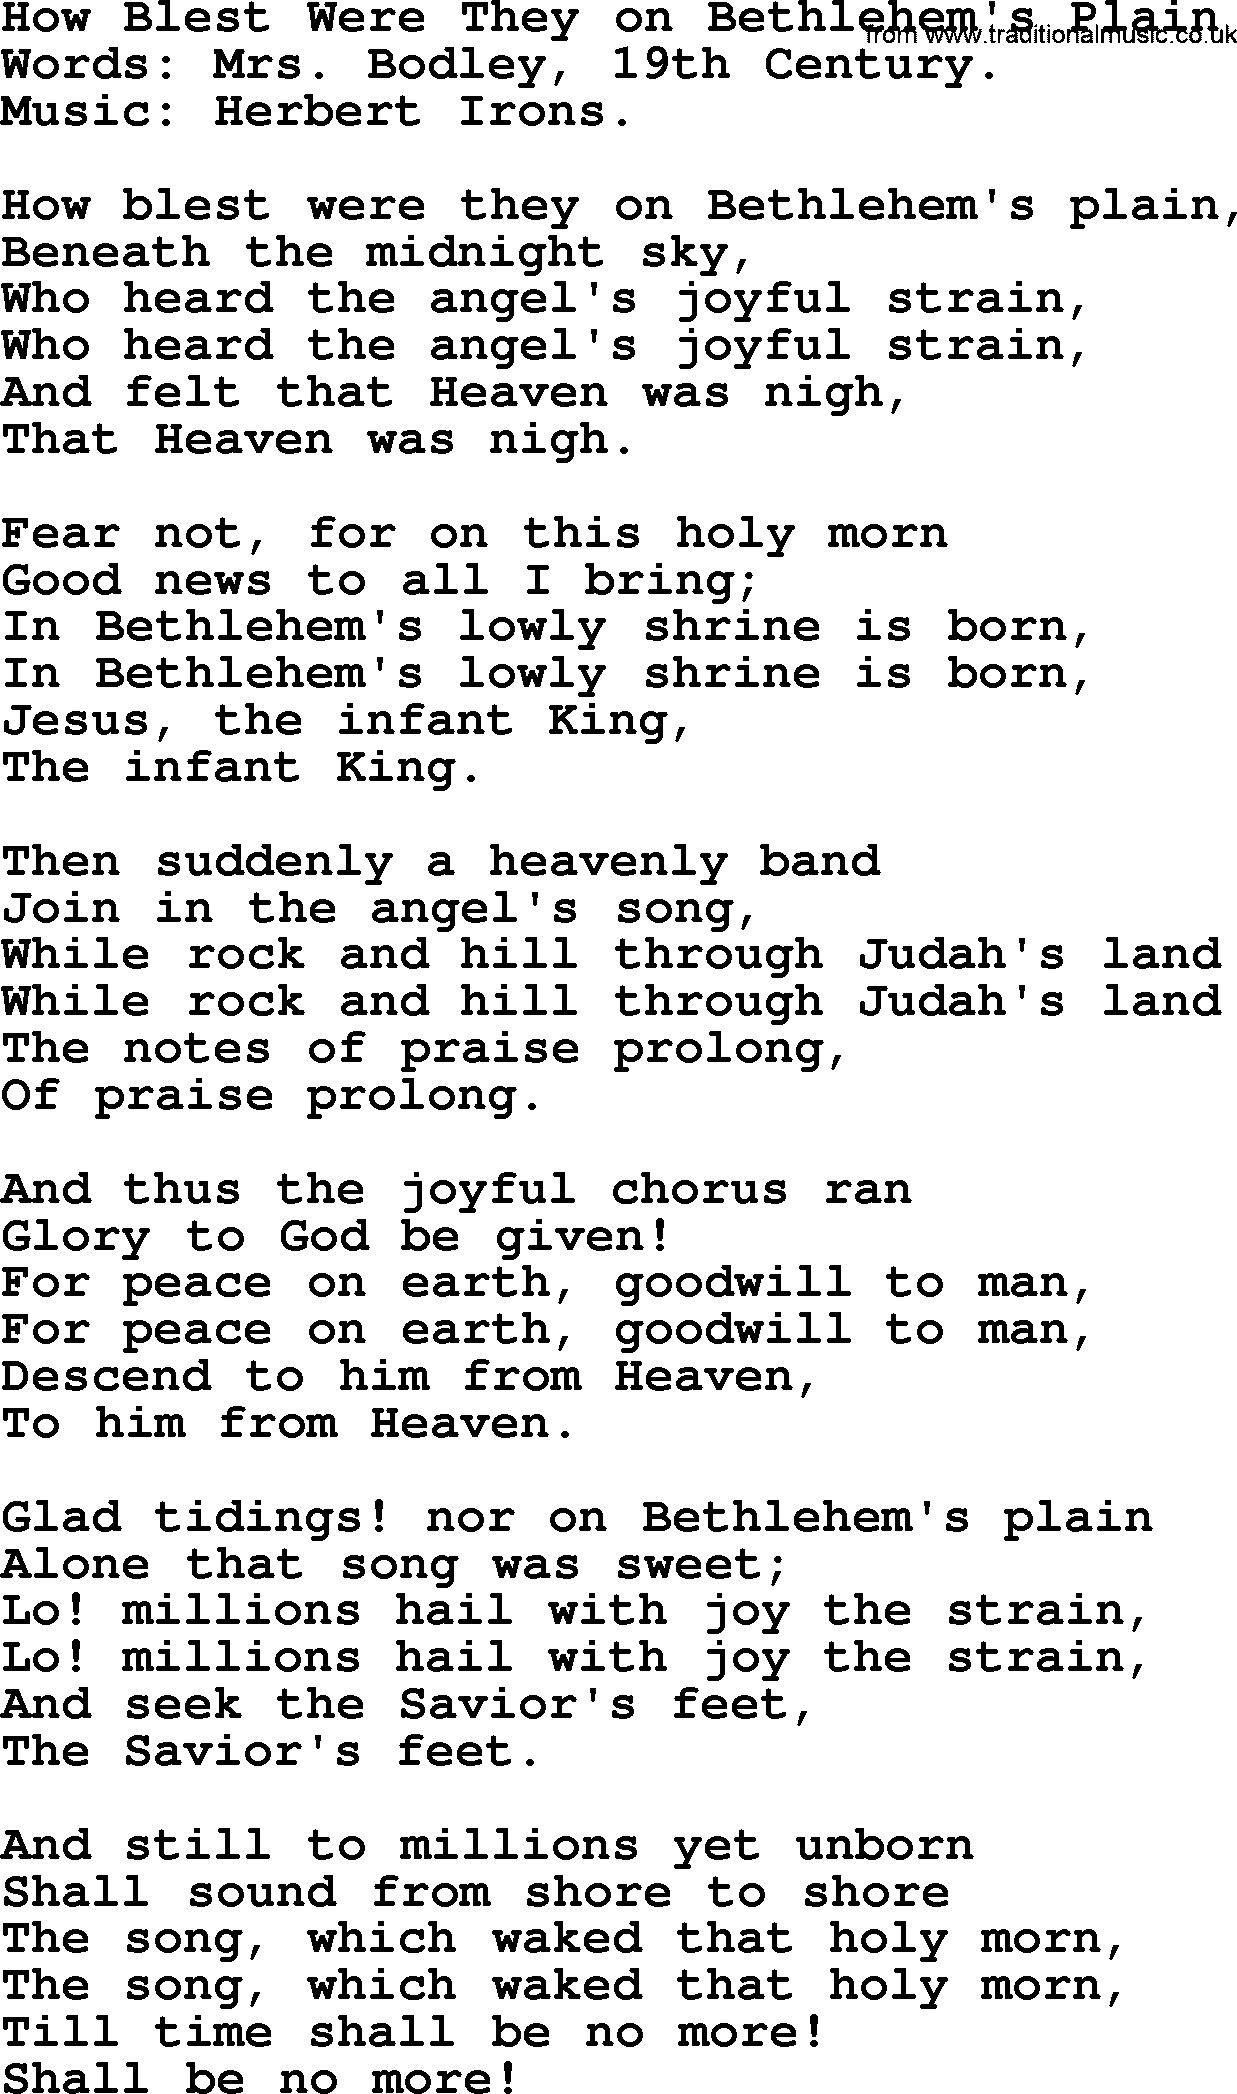 Christmas Hymns, Carols and Songs, title: How Blest Were They On Bethlehem's Plain, lyrics with PDF